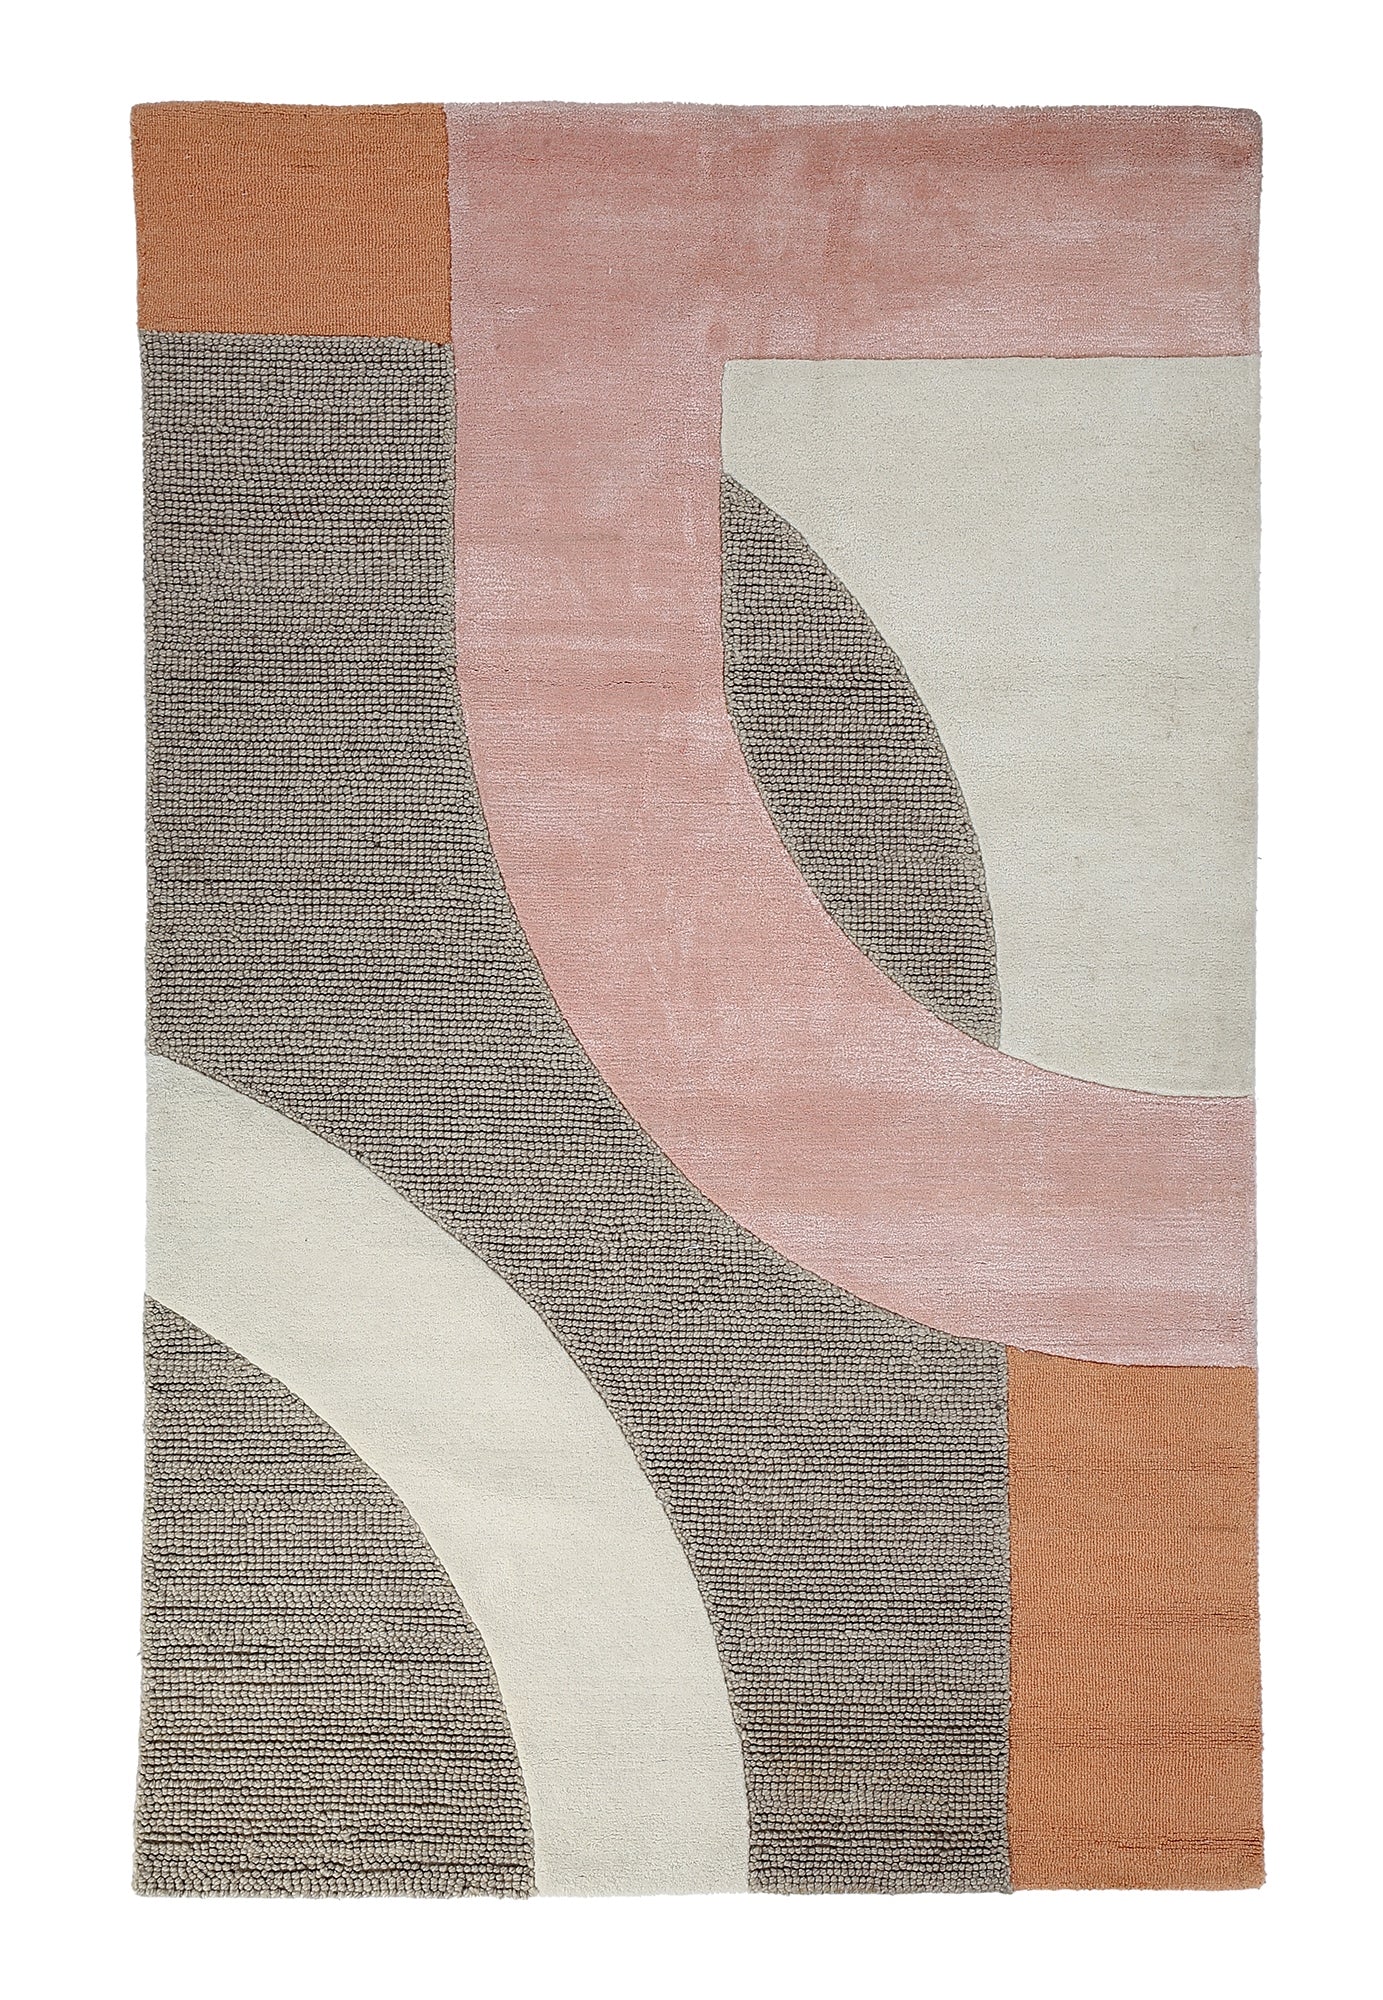 Multicolor Hand Tufted Wool Rug - 5'x8'